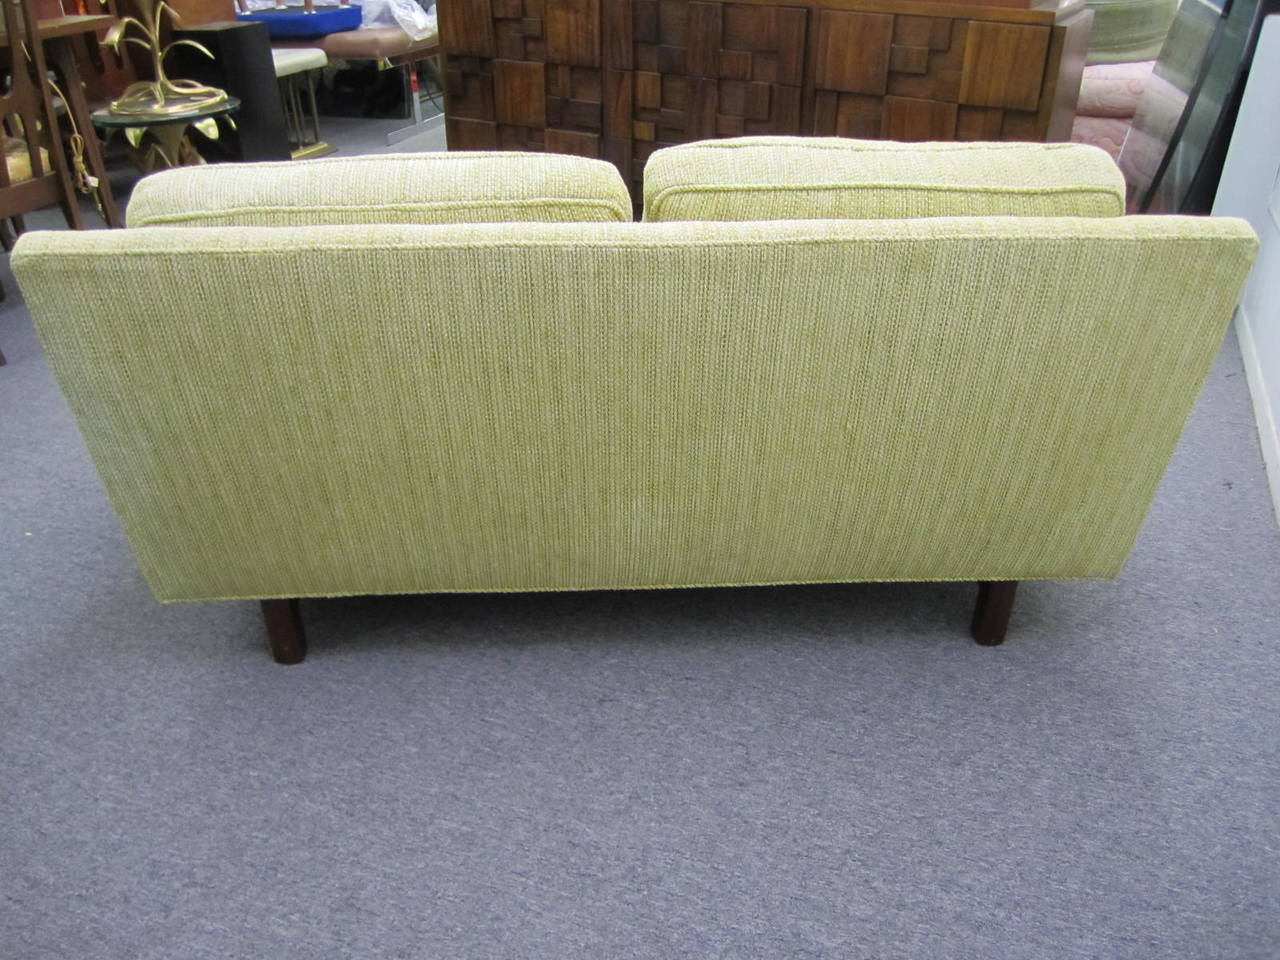 American Mid-Century Modern Two-Seater Loveseat Sofa by Edward Wormley for Dunbar For Sale